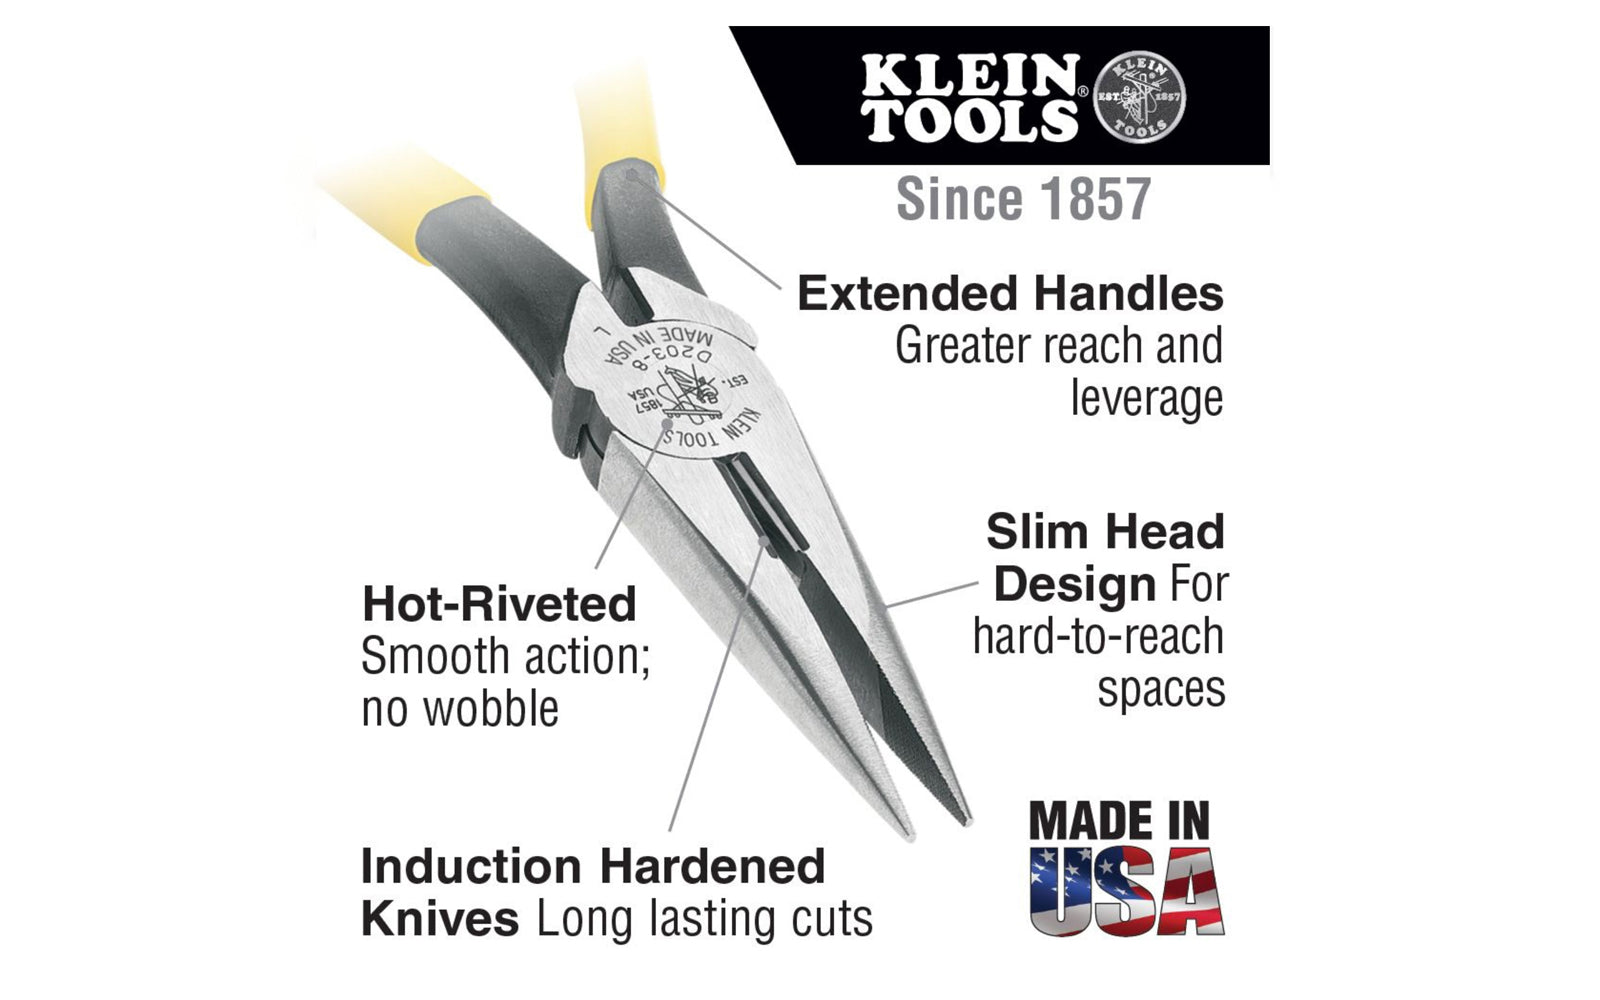 The Klein Tools Long-Nose Side-Cutters are made of forged steel for durability. The long nose is great for grabbing & looping wire. Cutting knives are induction hardened for long life. Knurled jaws provide sure wrapping & looping. Model D203-6.   Made in USA.